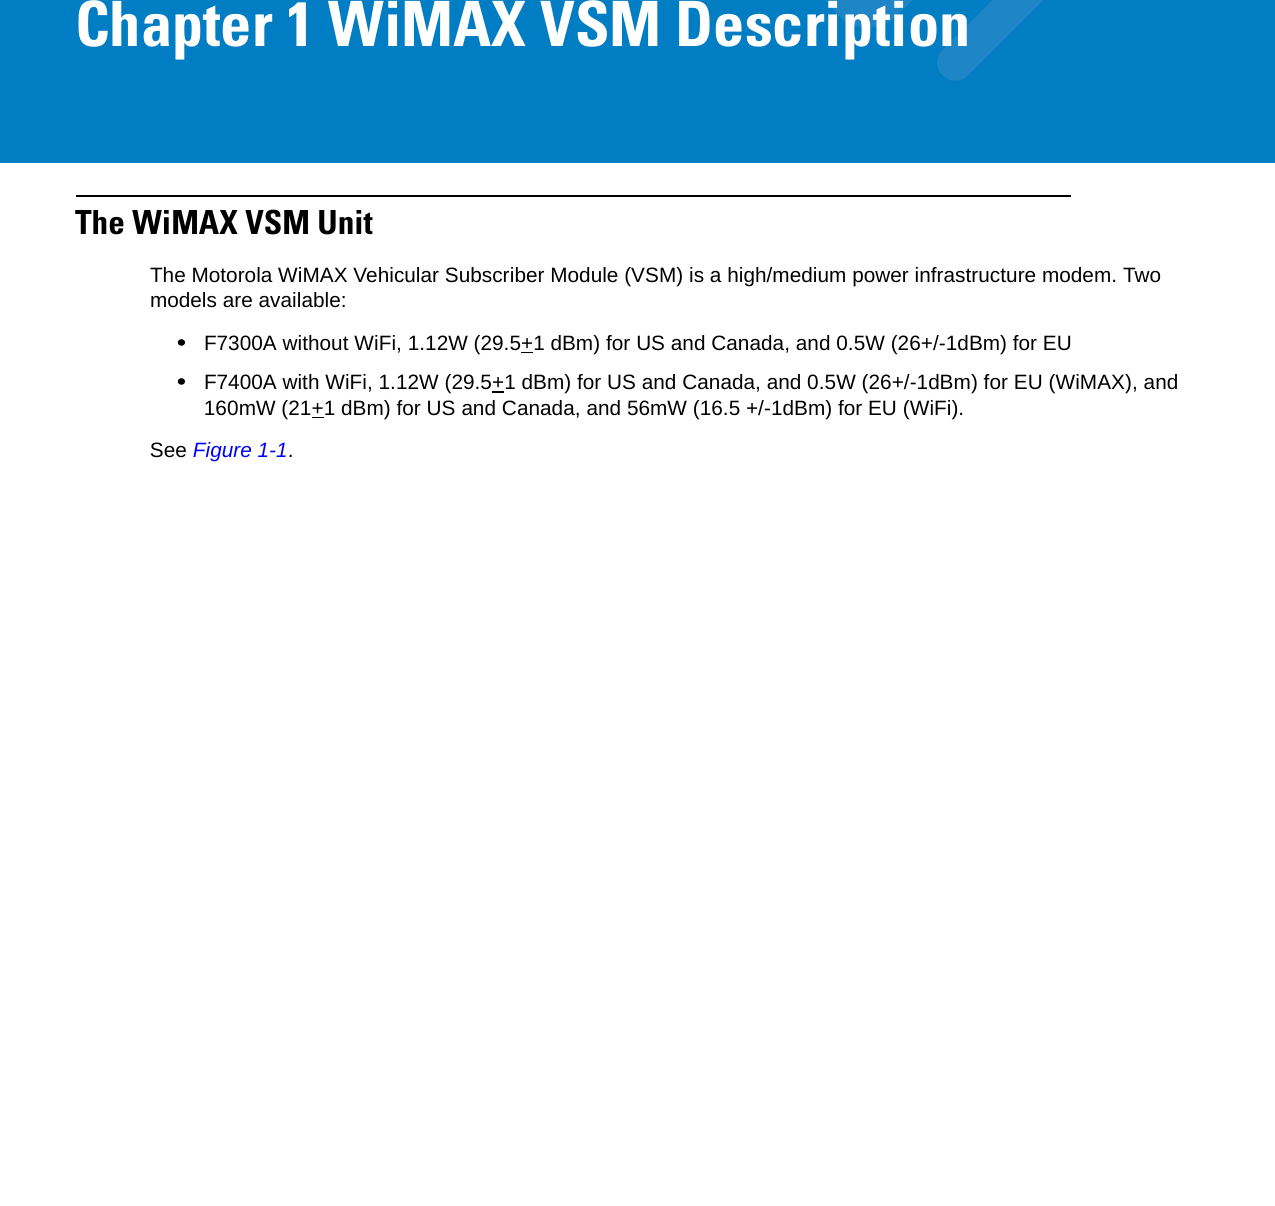 Chapter 1 WiMAX VSM DescriptionThe WiMAX VSM UnitThe Motorola WiMAX Vehicular Subscriber Module (VSM) is a high/medium power infrastructure modem. Two models are available:•F7300A without WiFi, 1.12W (29.5+1 dBm) for US and Canada, and 0.5W (26+/-1dBm) for EU•F7400A with WiFi, 1.12W (29.5+1 dBm) for US and Canada, and 0.5W (26+/-1dBm) for EU (WiMAX), and 160mW (21+1 dBm) for US and Canada, and 56mW (16.5 +/-1dBm) for EU (WiFi).See Figure 1-1.